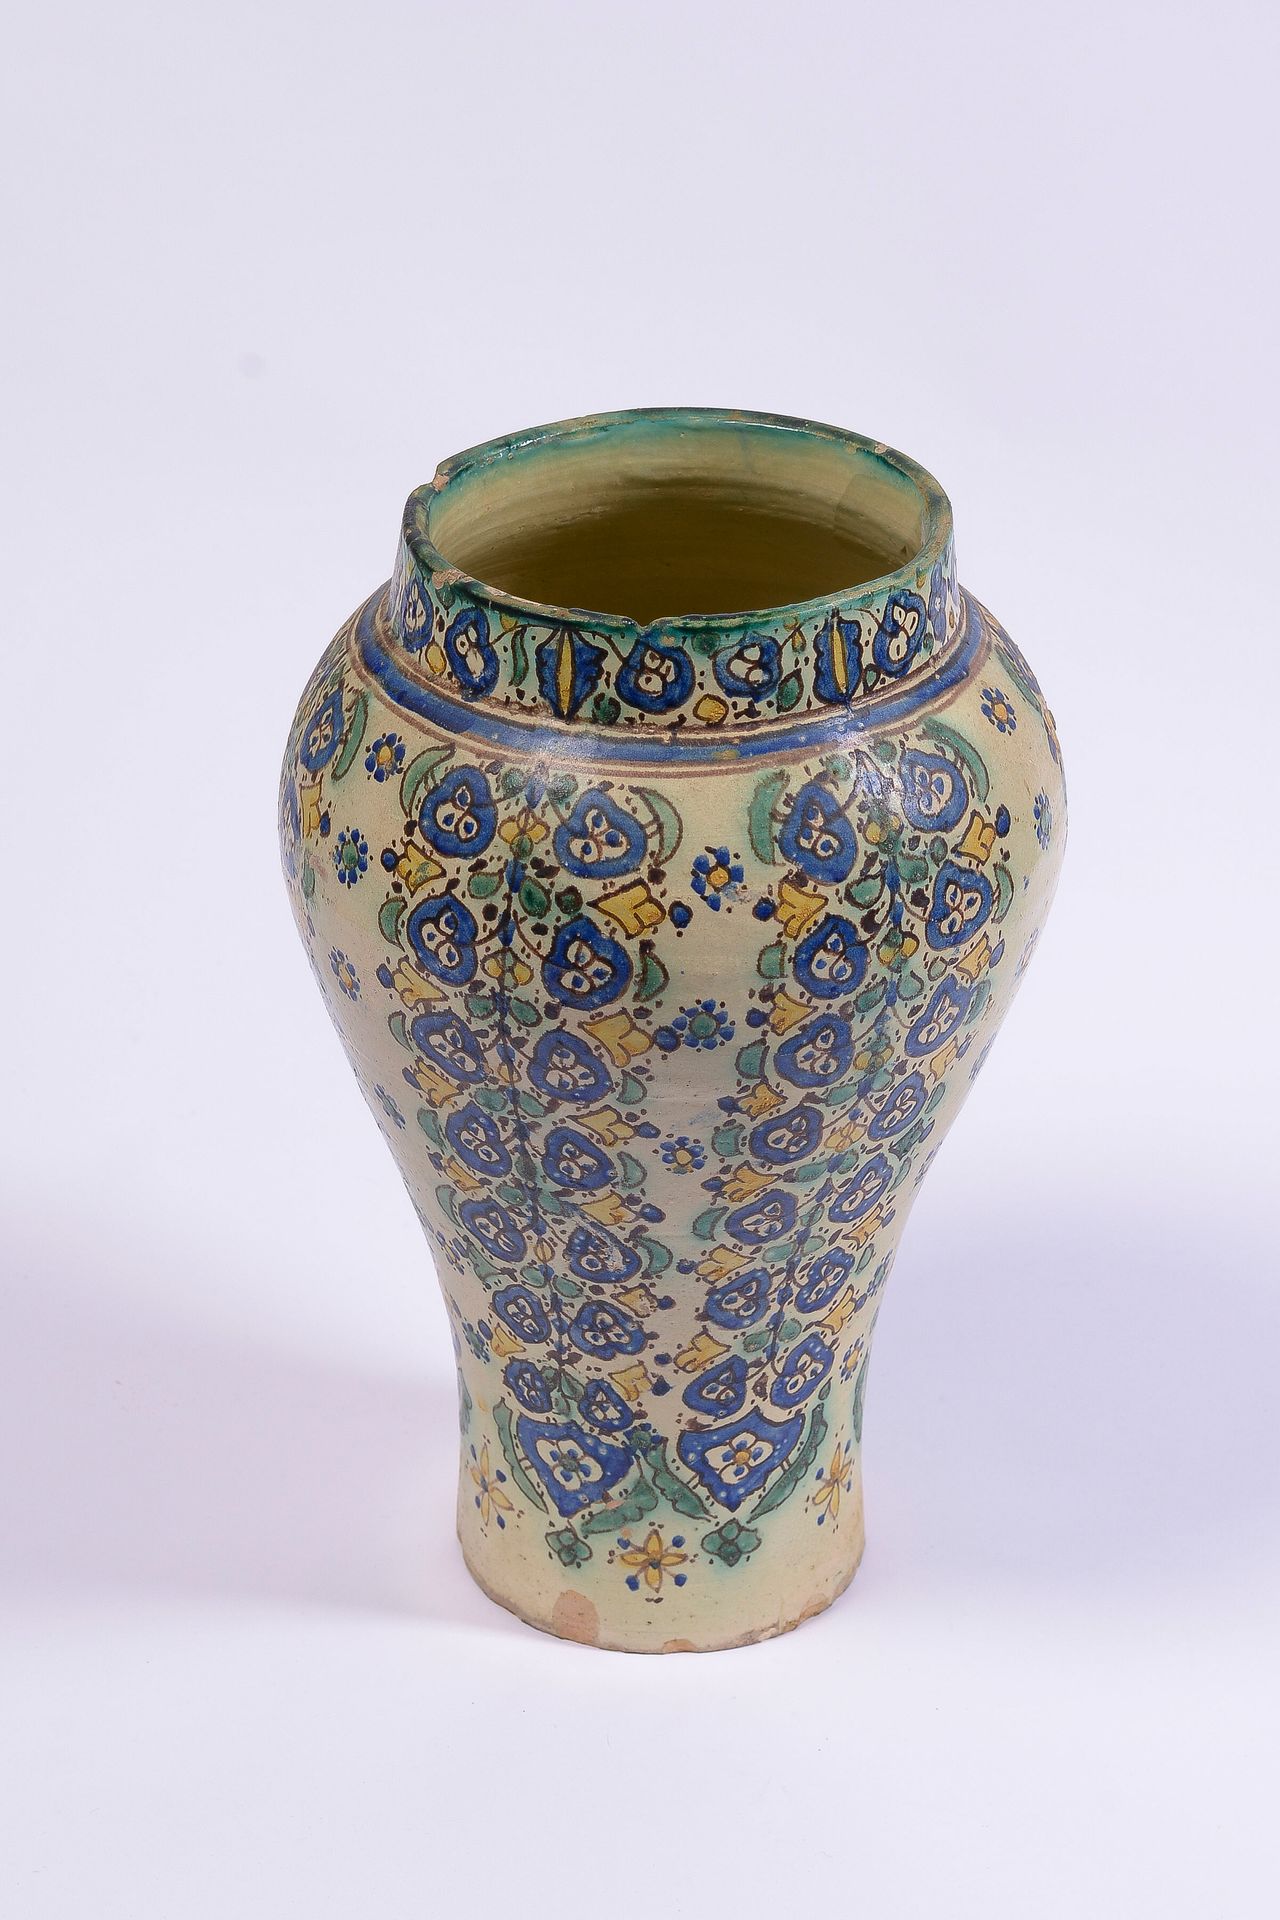 Null Large ceramic vase with polychrome enamelled decoration of floral scrolls

&hellip;